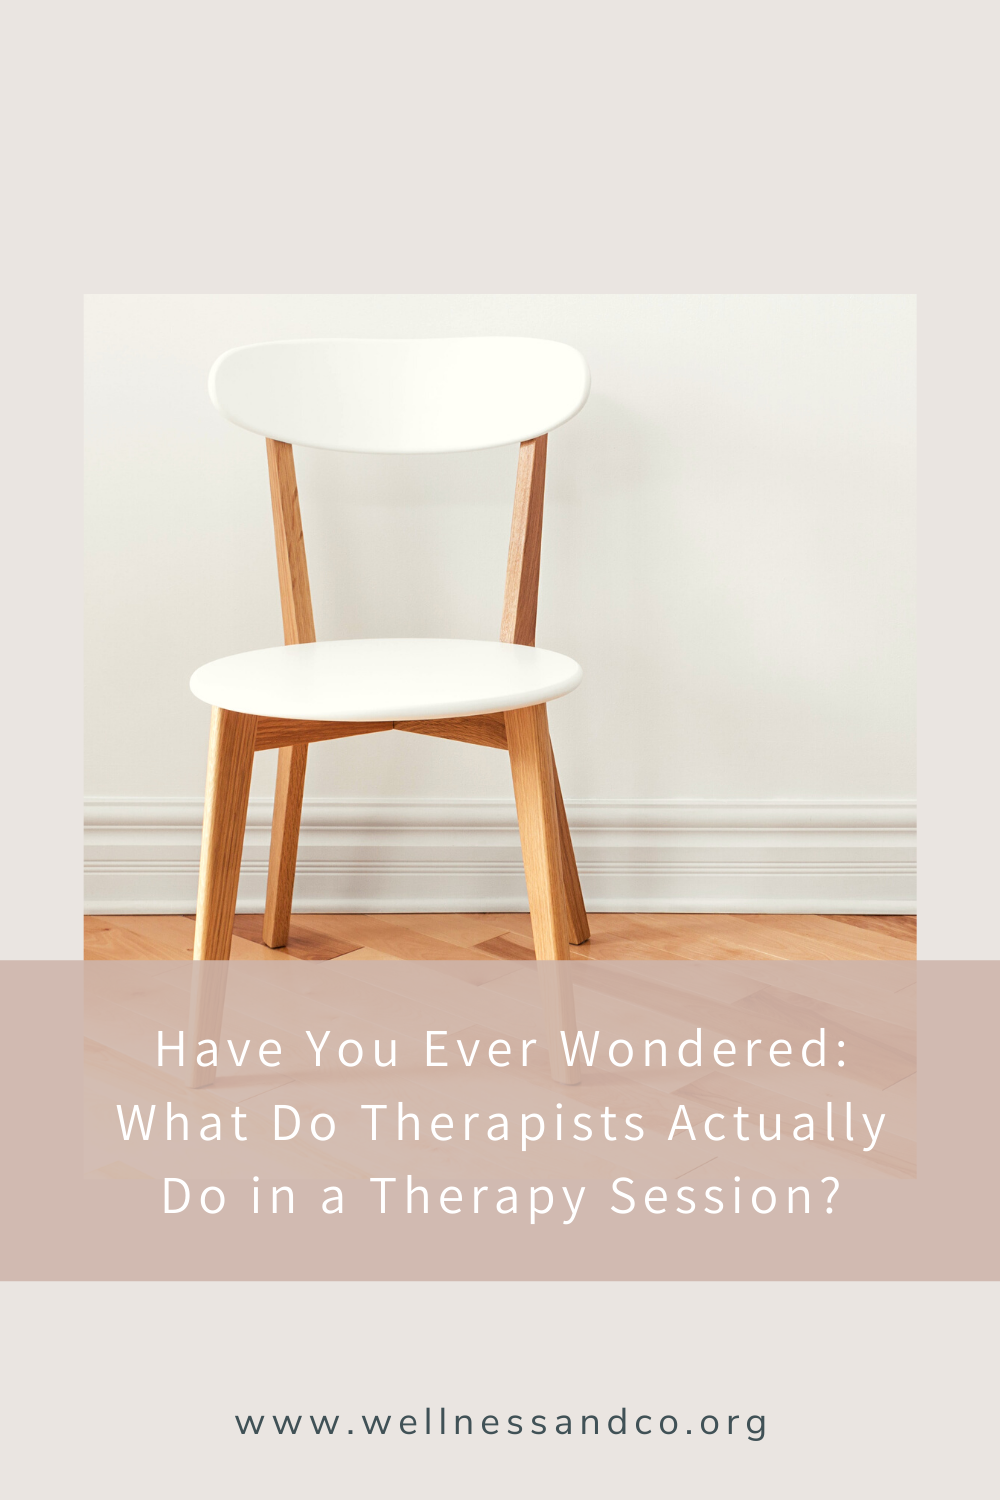 Have You Ever Wondered: What Do Therapists Actually Do in a Therapy Session? | This post explores, in poem form, the intricacies of therapy and what being a therapist is like. The post details several examples of how a therapist works in a session. Cheers!